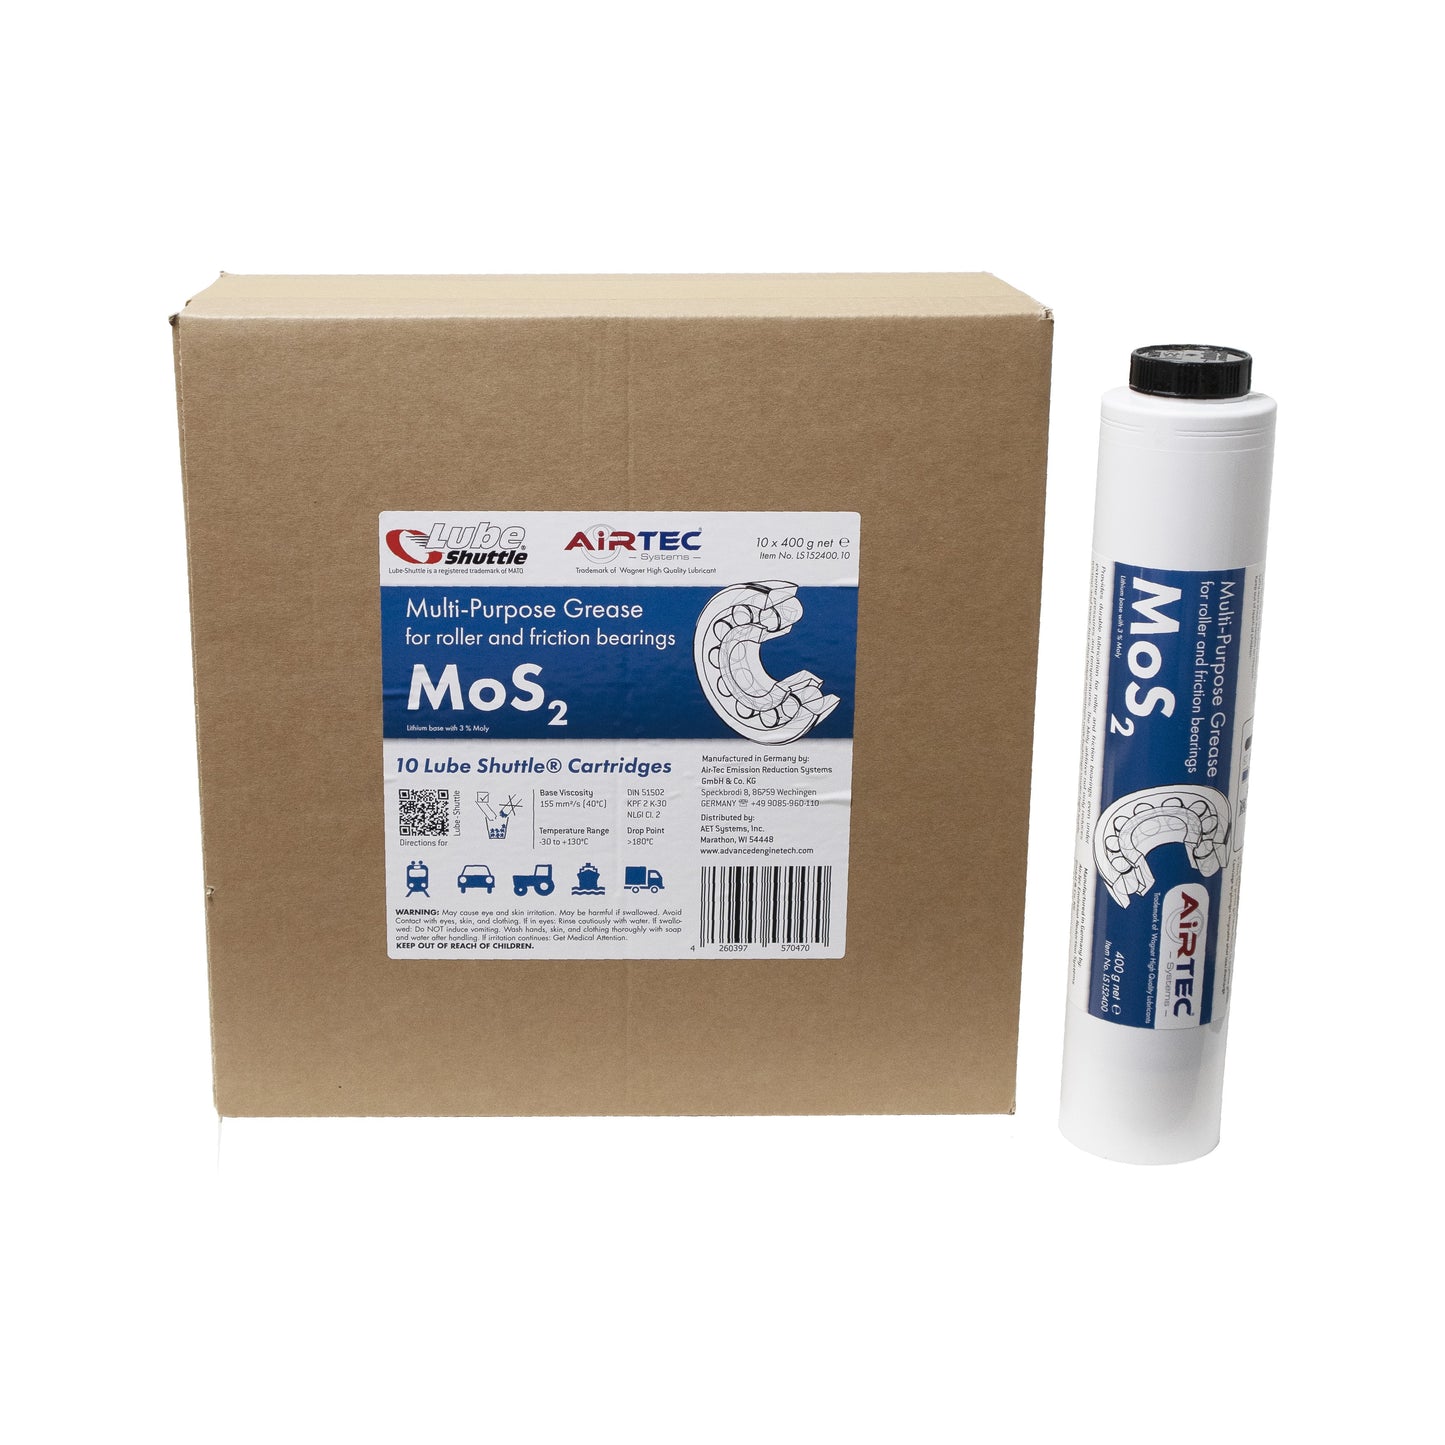 AirTec® MoS2 Moly High Pressure Grease Cartridge for Lube-Shuttle®